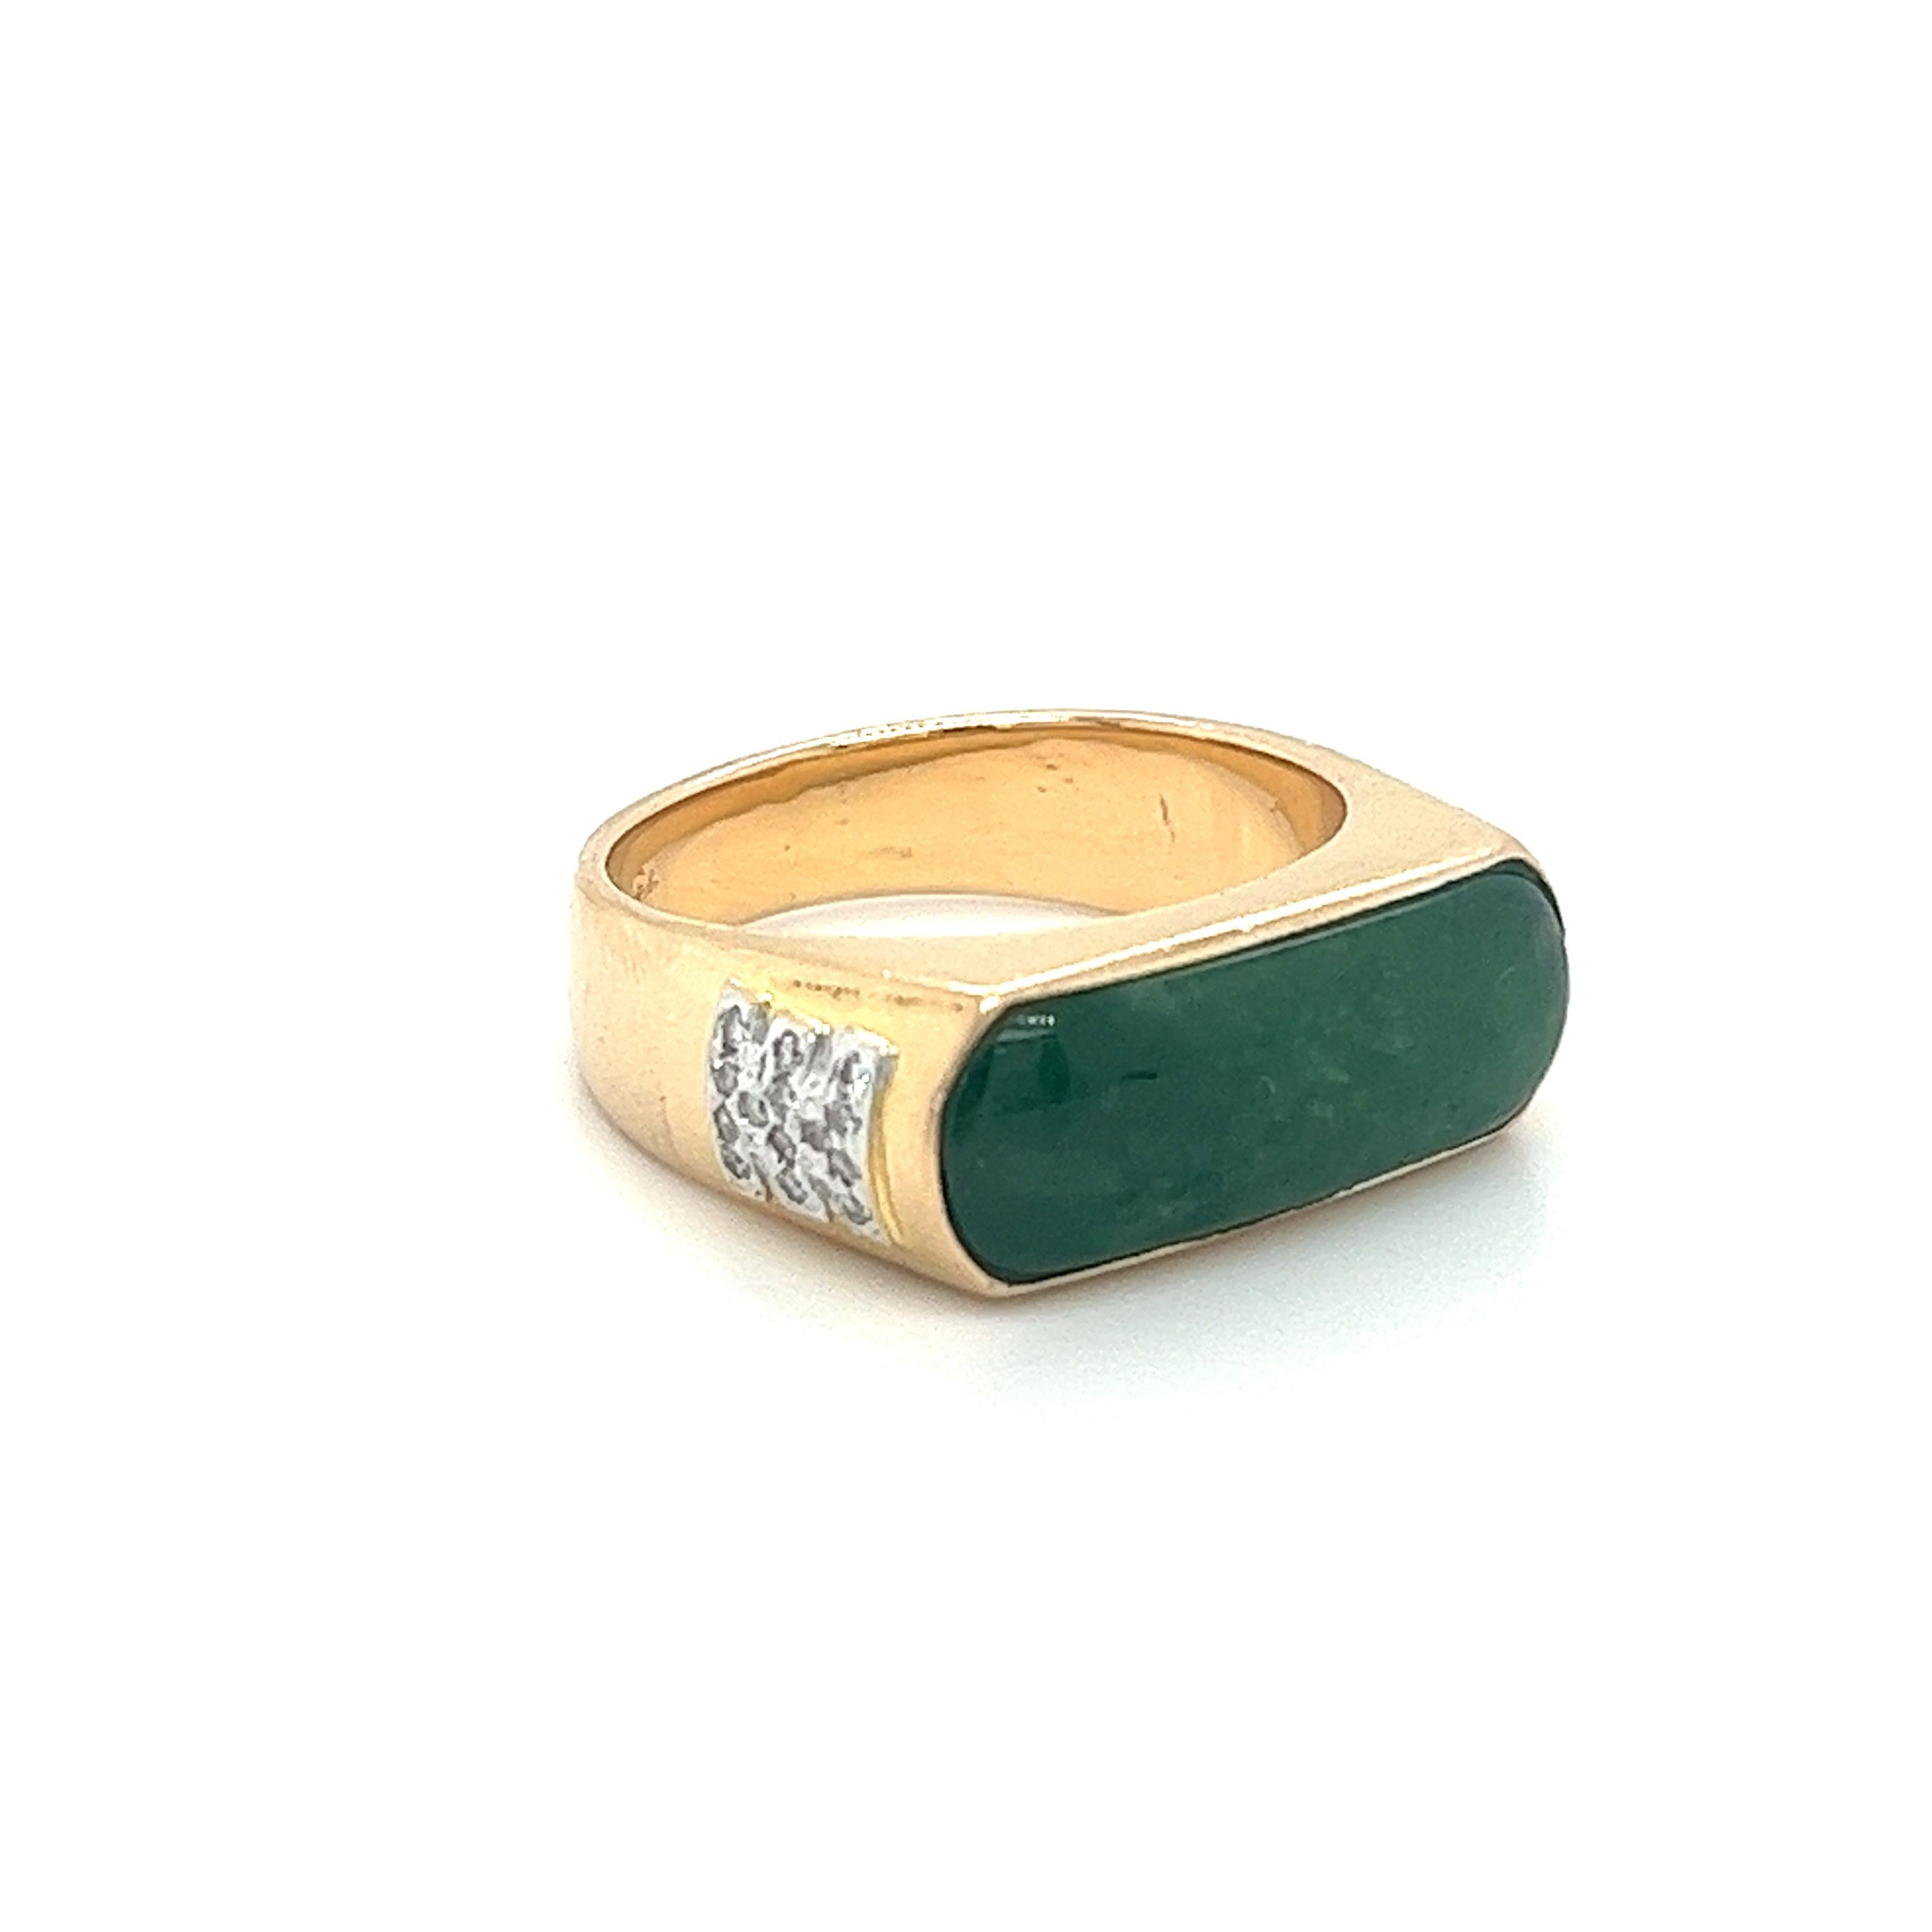 18K solid yellow gold unisex ring centering a stunning 19.0 x 6.7mm jadeite jade centerpiece. Accentuated by 28 round cut diamonds totaling 0.20CTW. Set in a horizontal bezel setting. A perfect blend of elegance and style, this ring is sure to make